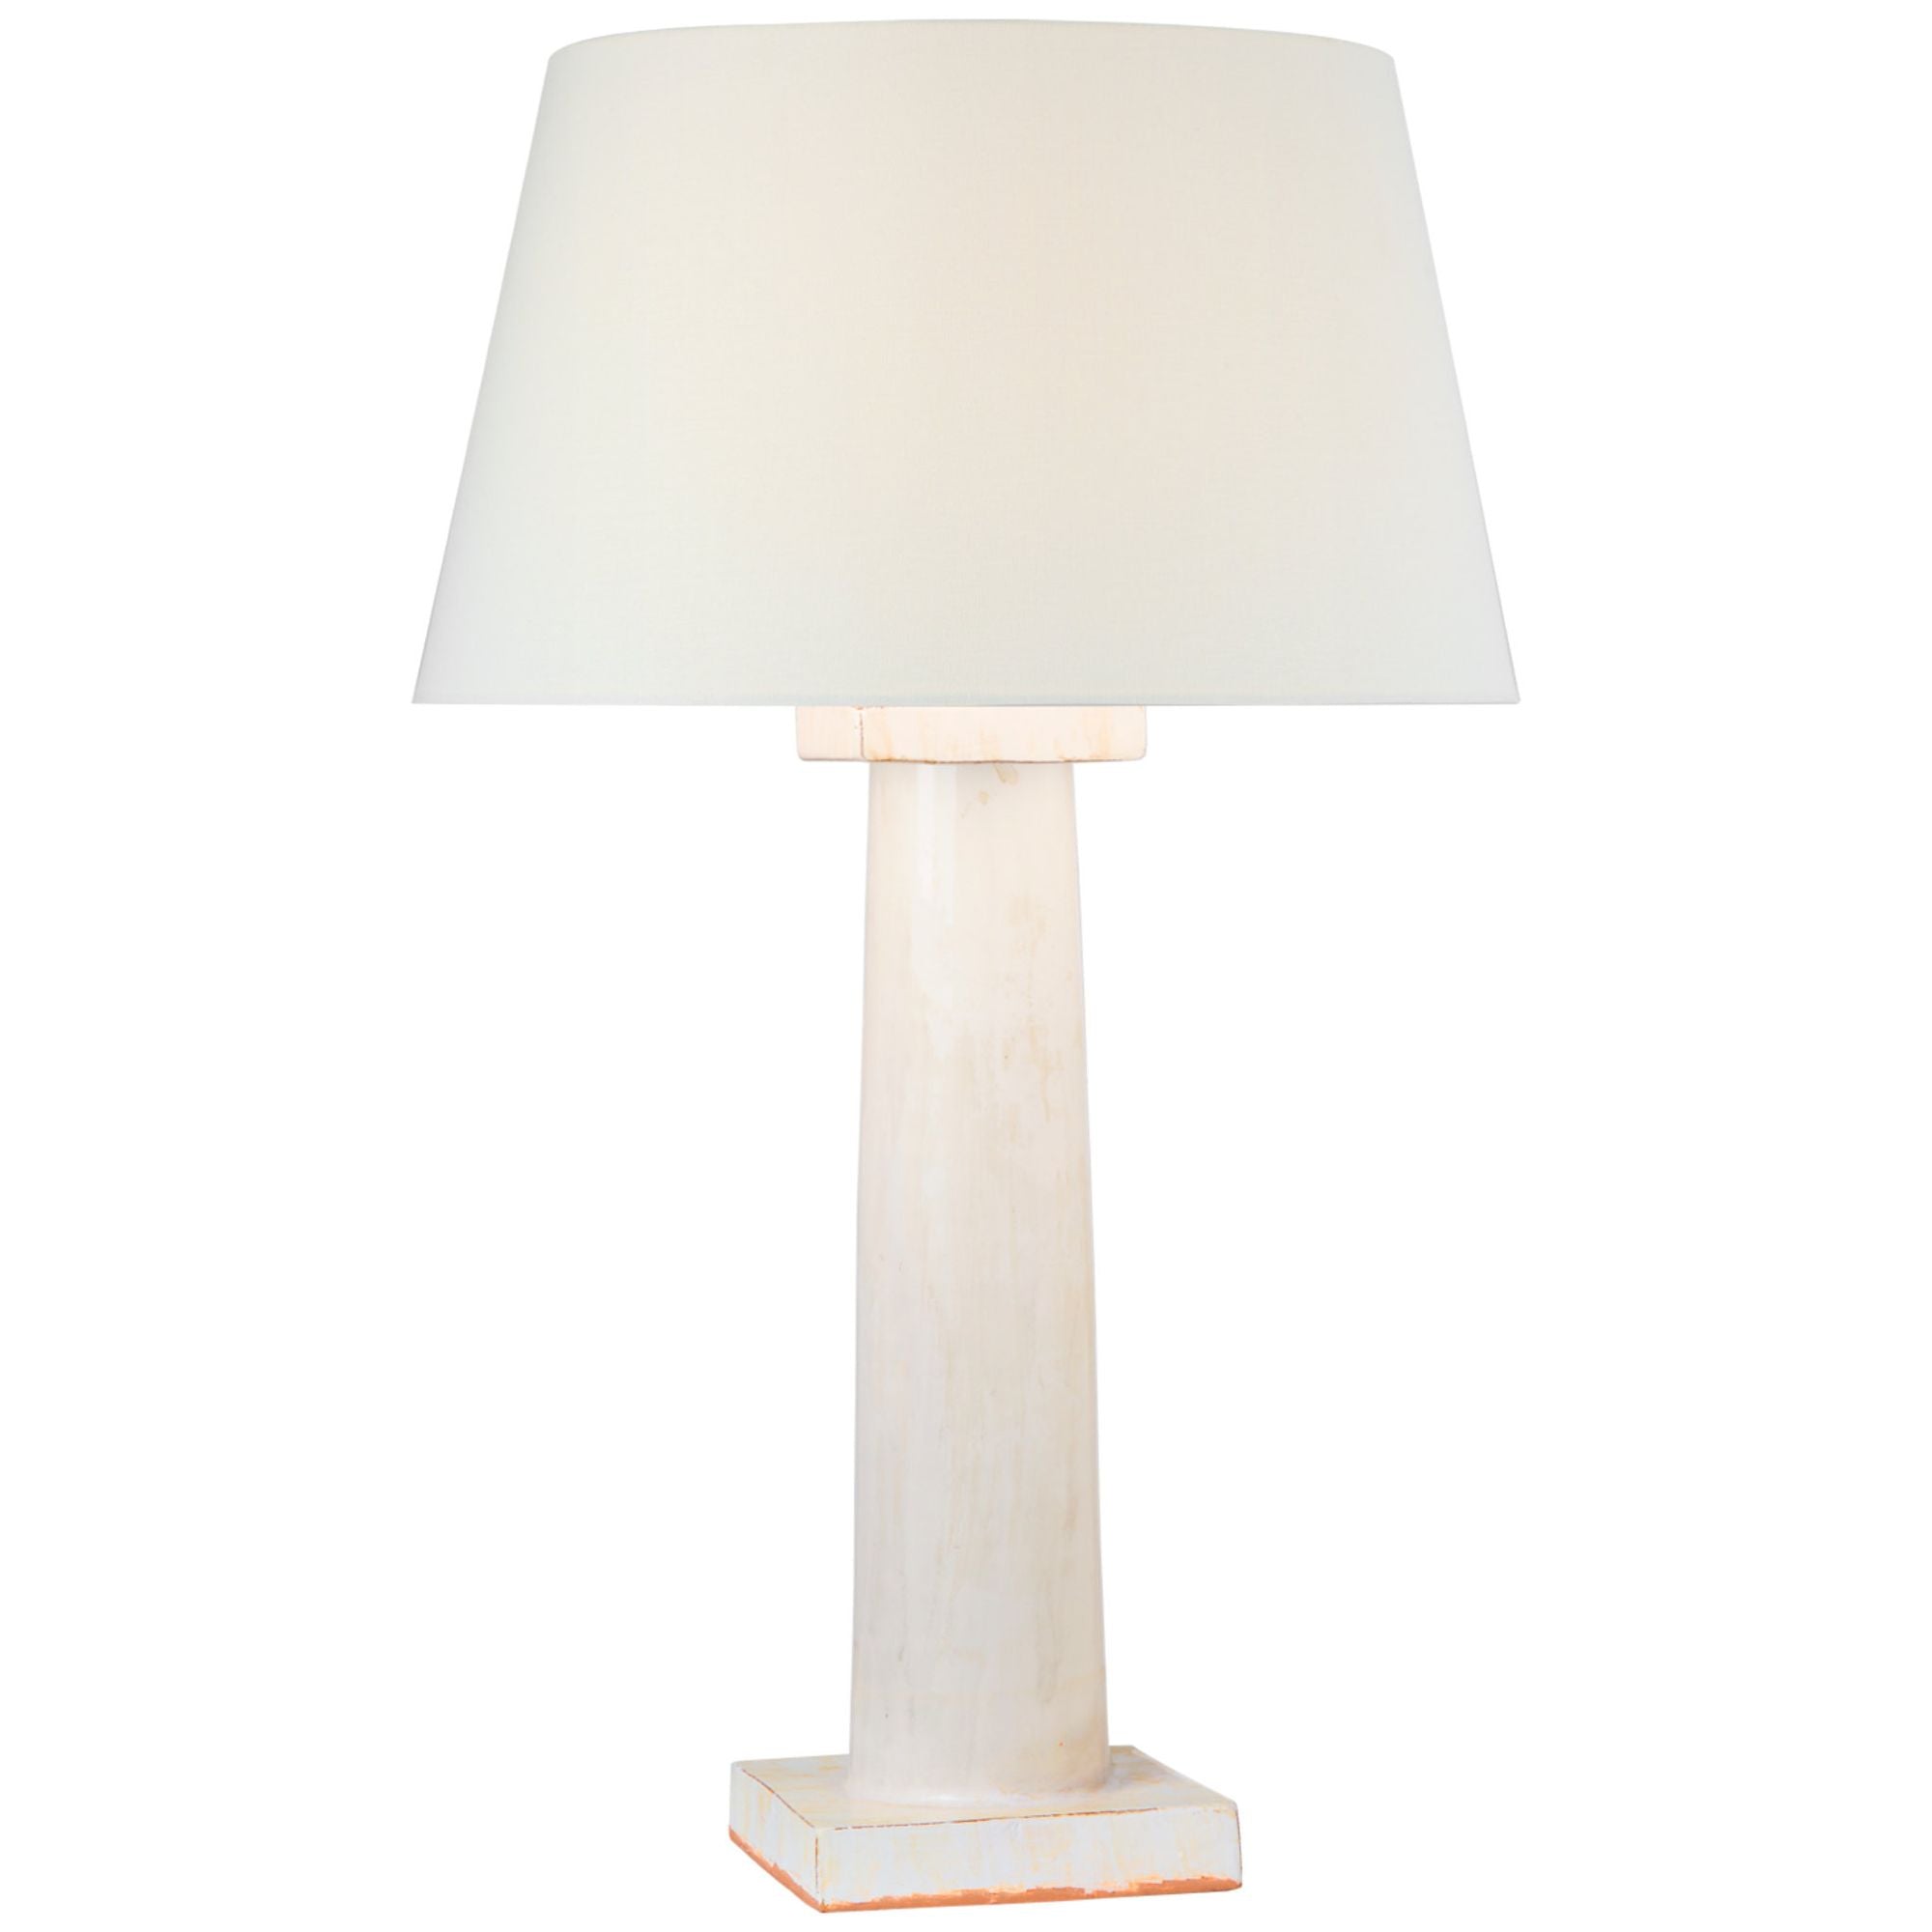 Chapman & Myers Colonne Large Balustrade Table Lamp in Glossy White Crackle with Linen Shade